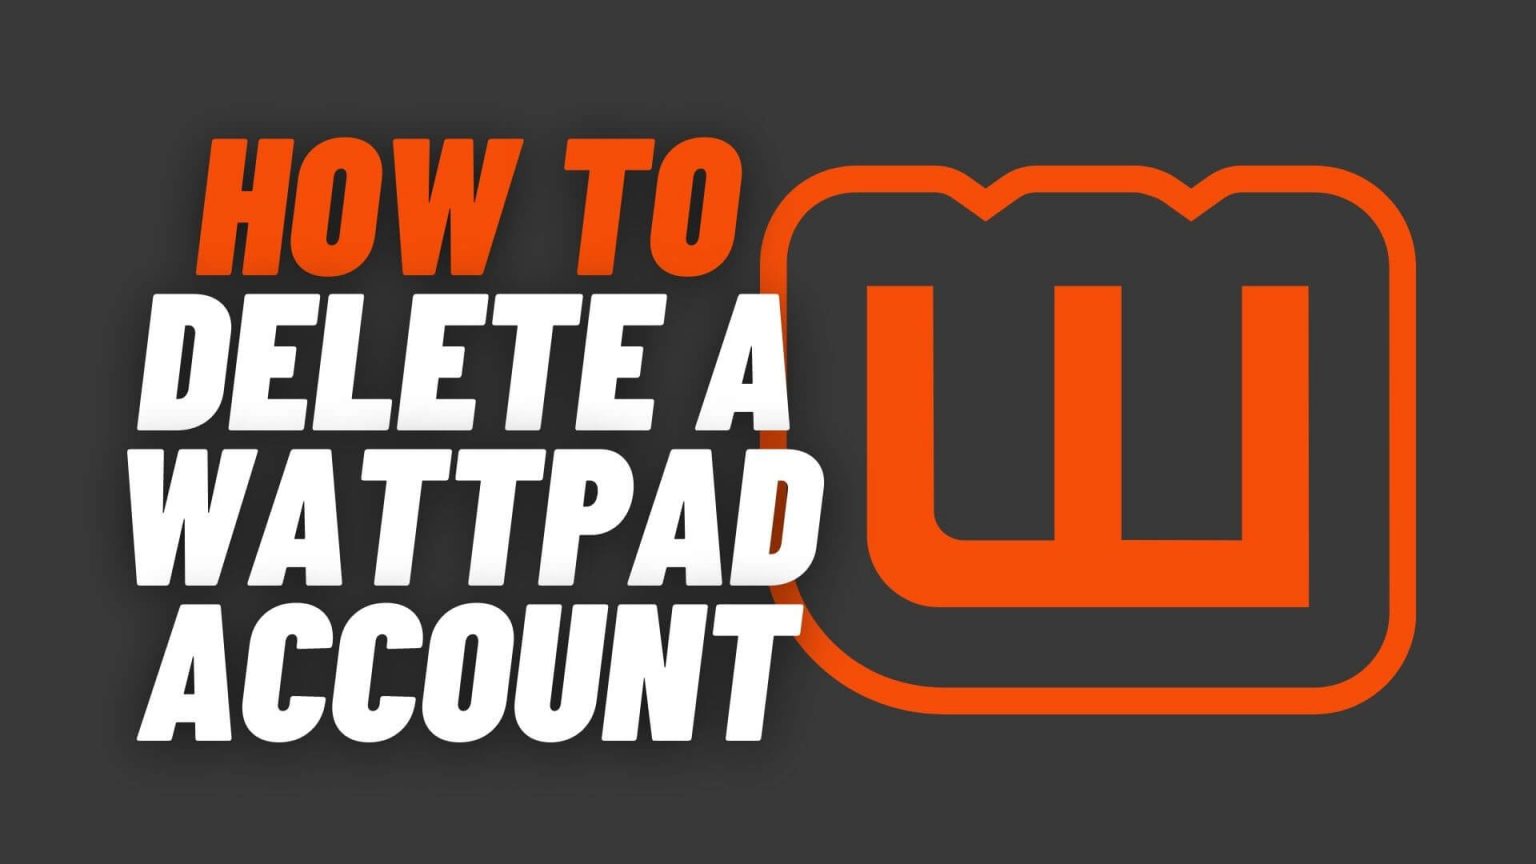 How To Delete A Wattpad Account | 7 Easy Steps